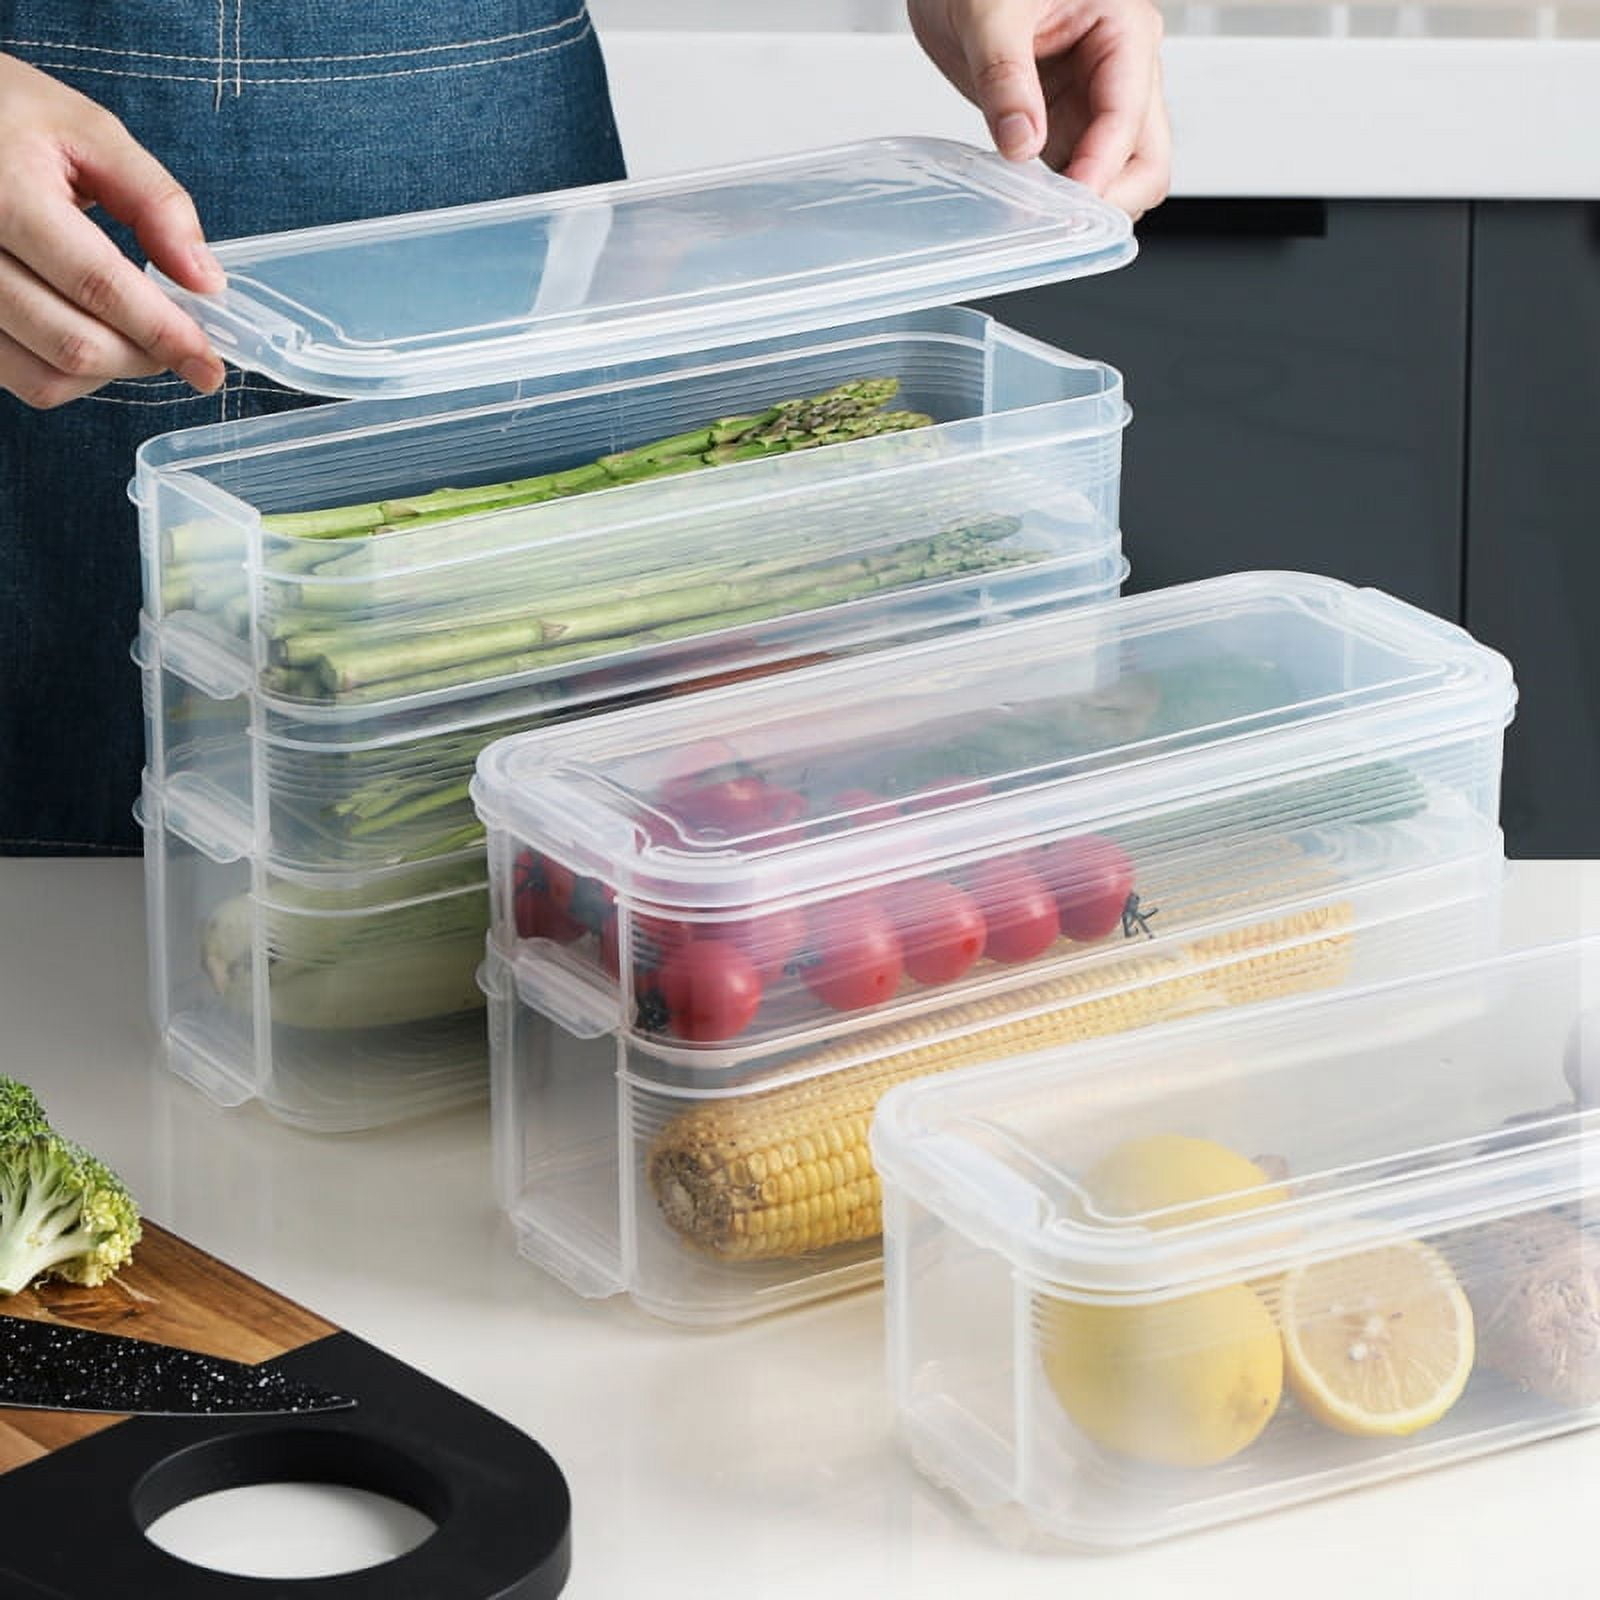 Shulemin Plastic Refrigerator Food Preservation Storage Drain Box Container with Lid-L, Size: 13.9, Clear